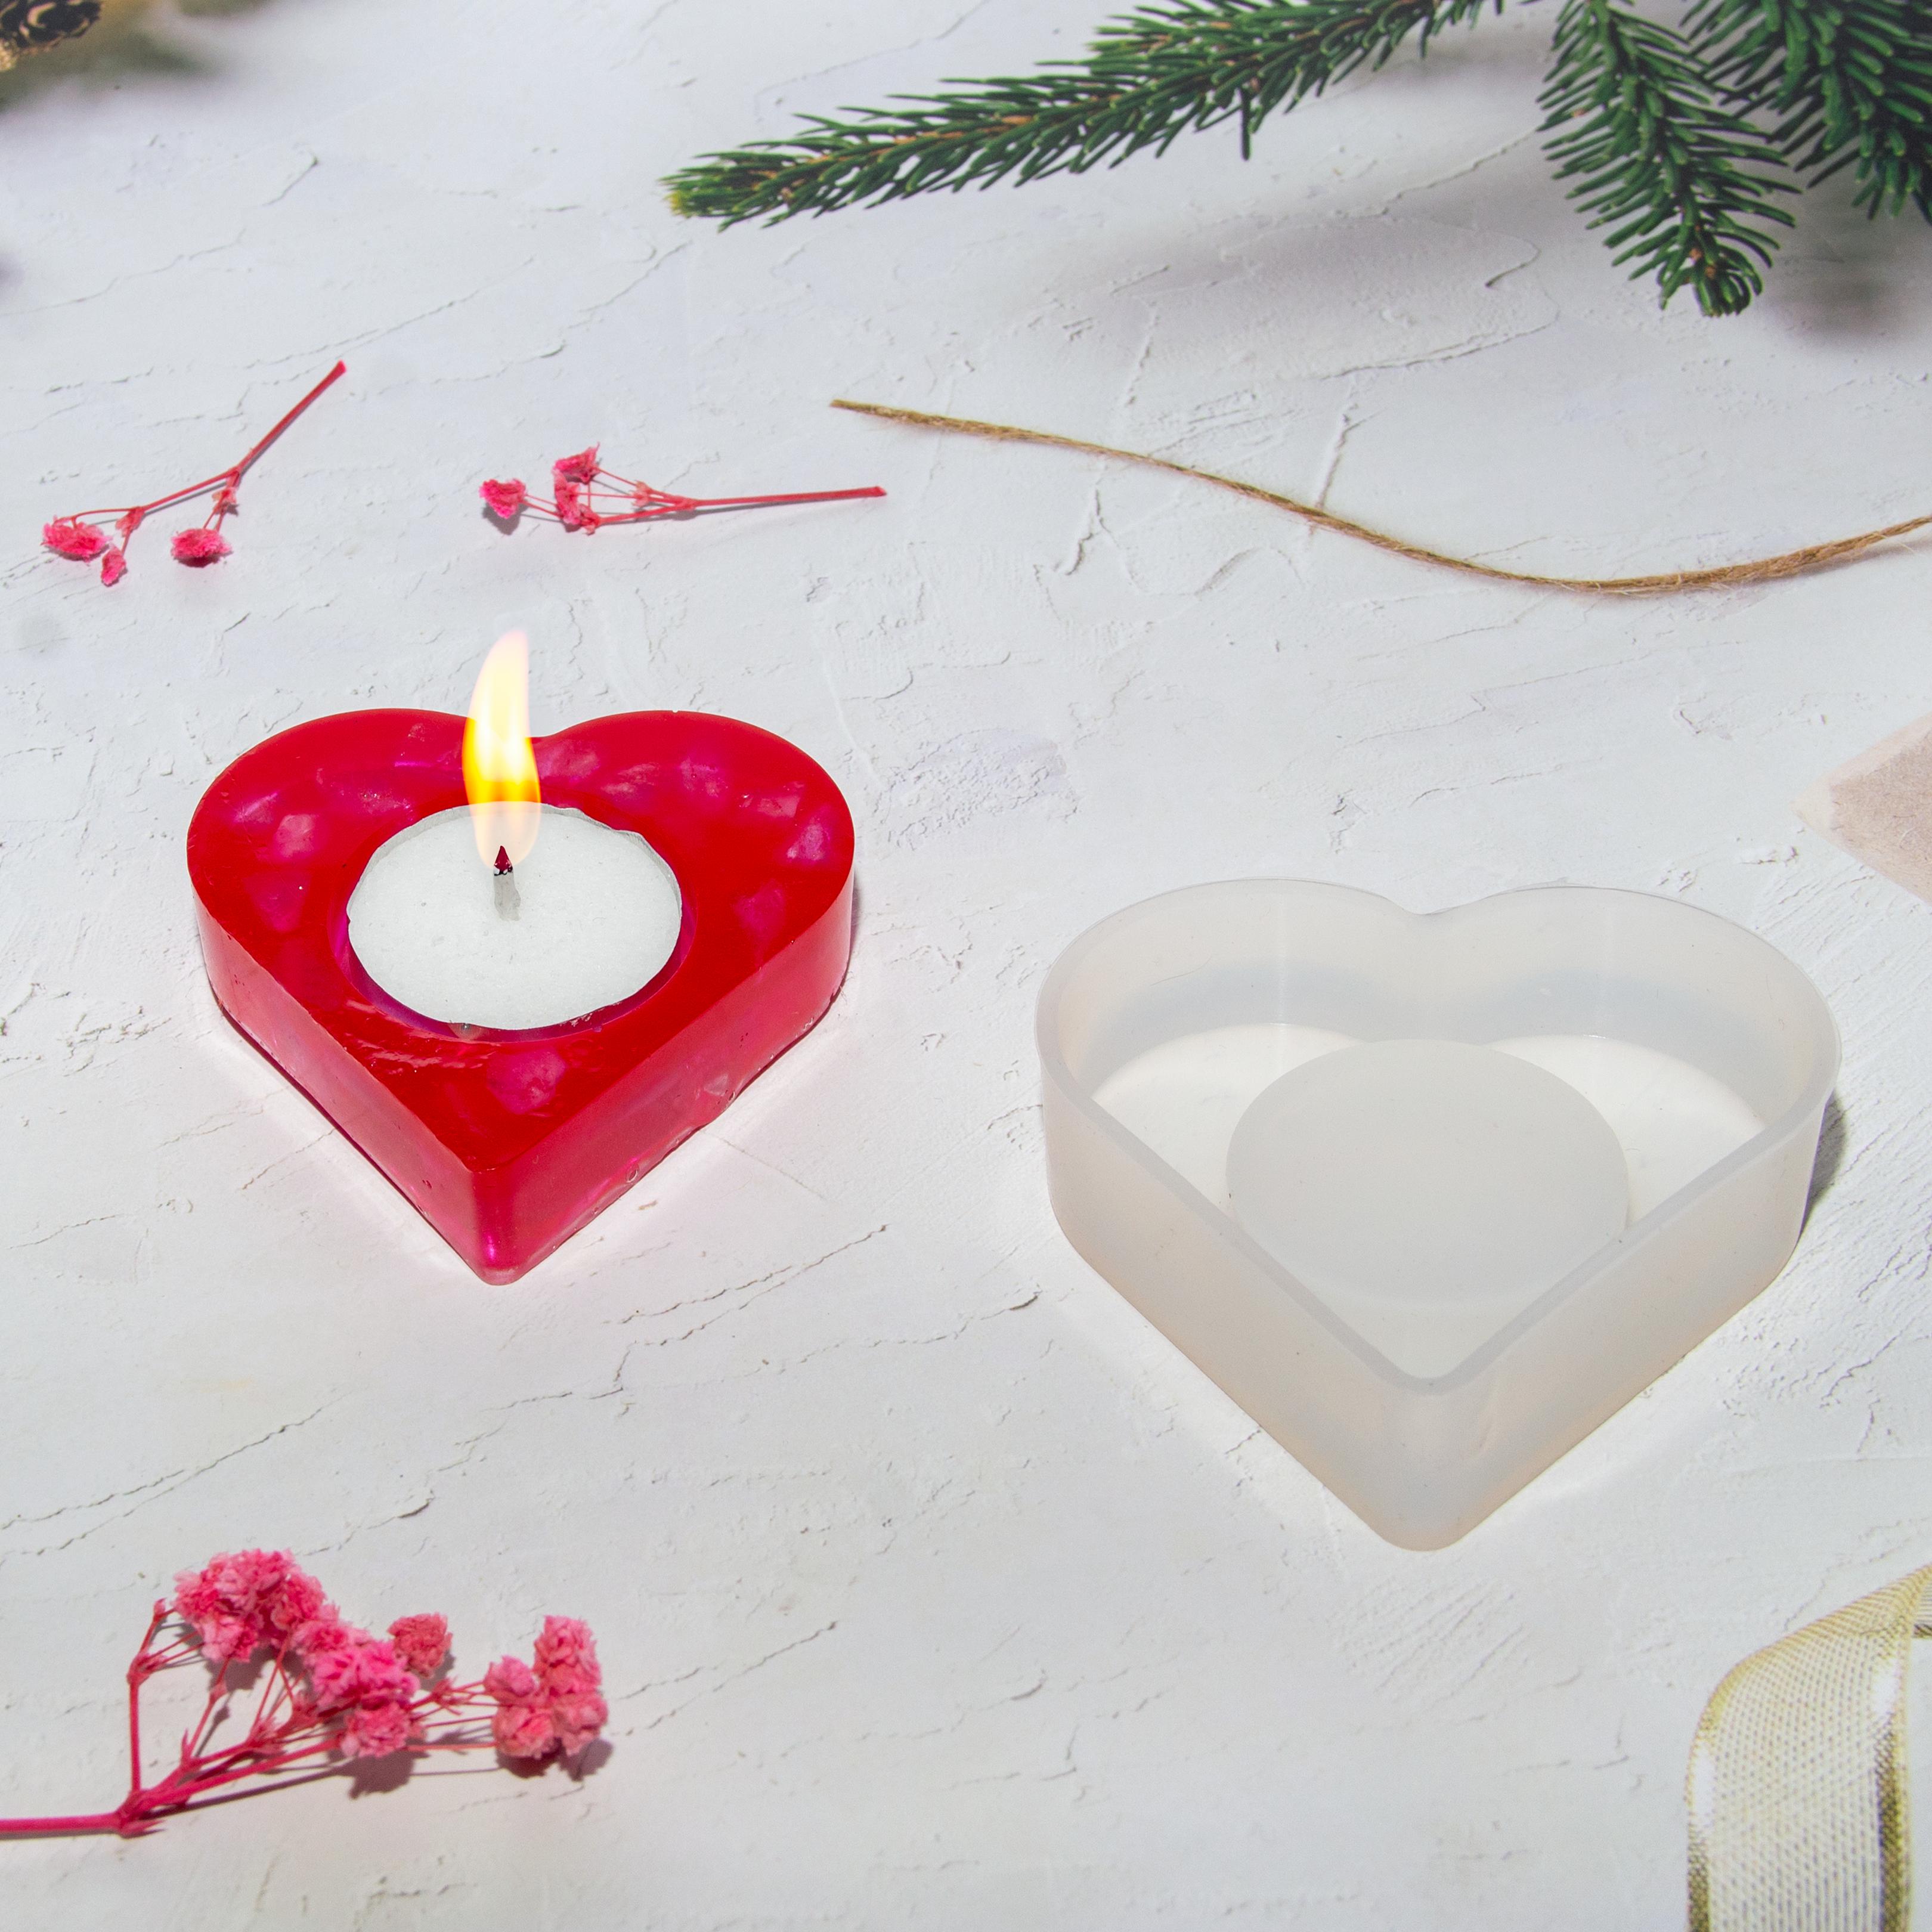 Silicone Mould Heart Tea Light Holder L3 X W3 D-0.75 inch 1pc